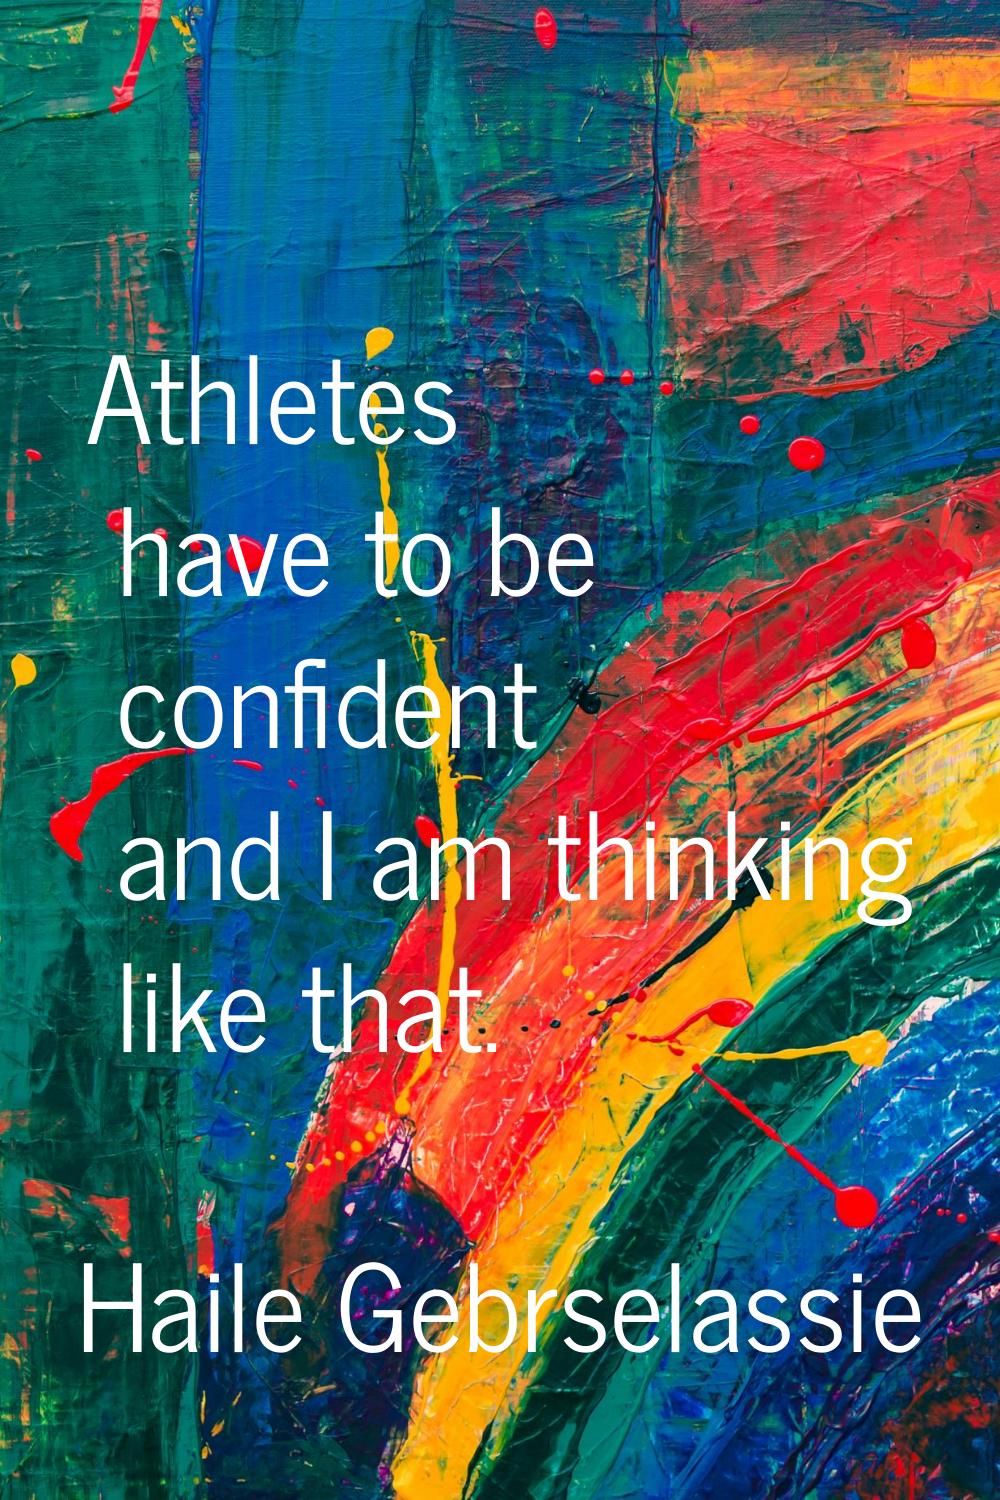 Athletes have to be confident and I am thinking like that.